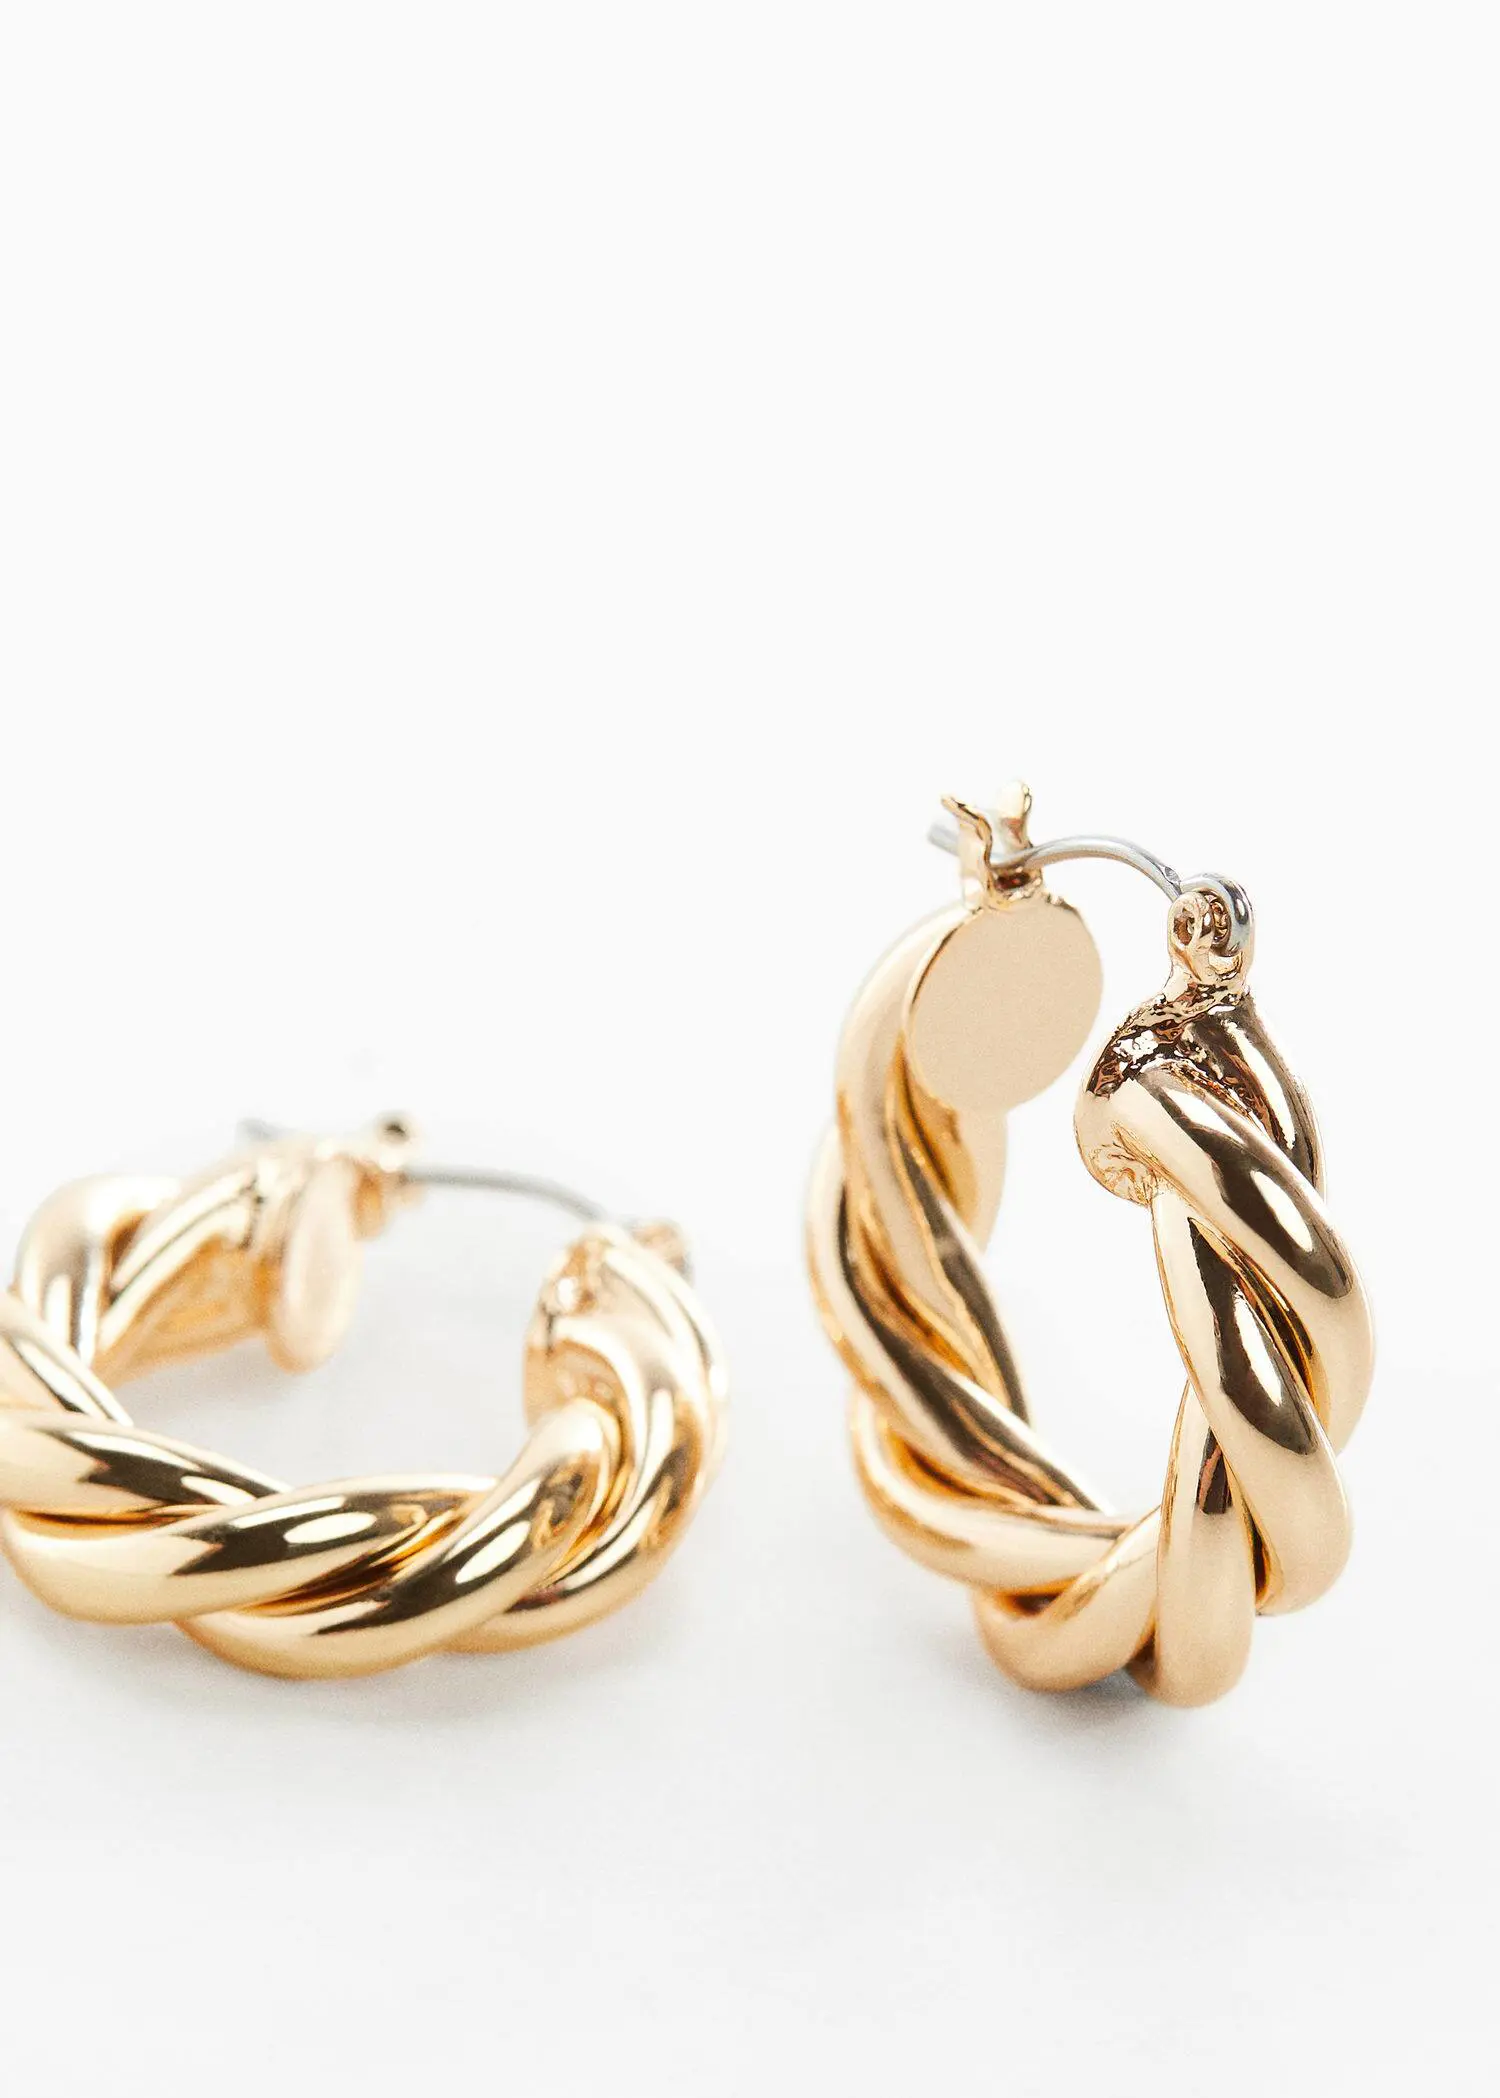 Mango Intertwined hoop earrings. a close up of a pair of gold earrings 